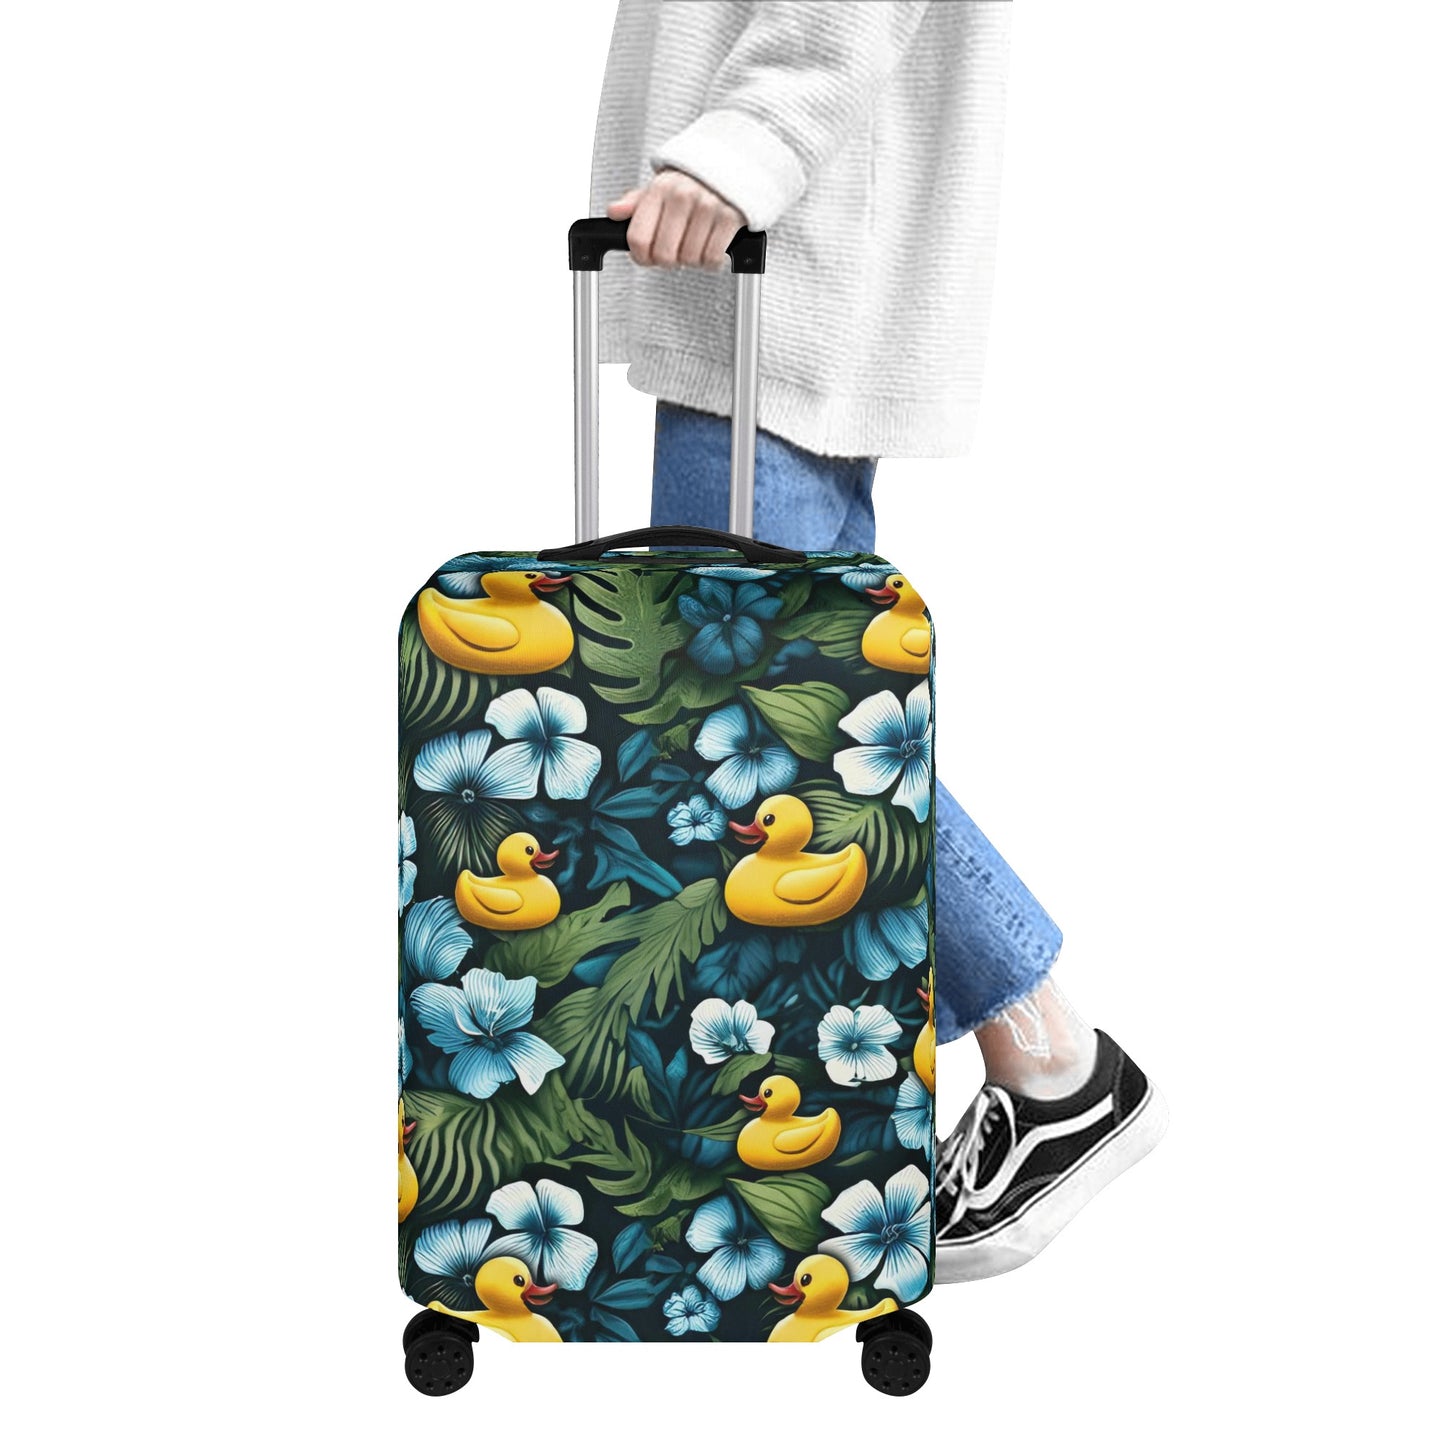 Ducky Royal Blue Luggage Cover